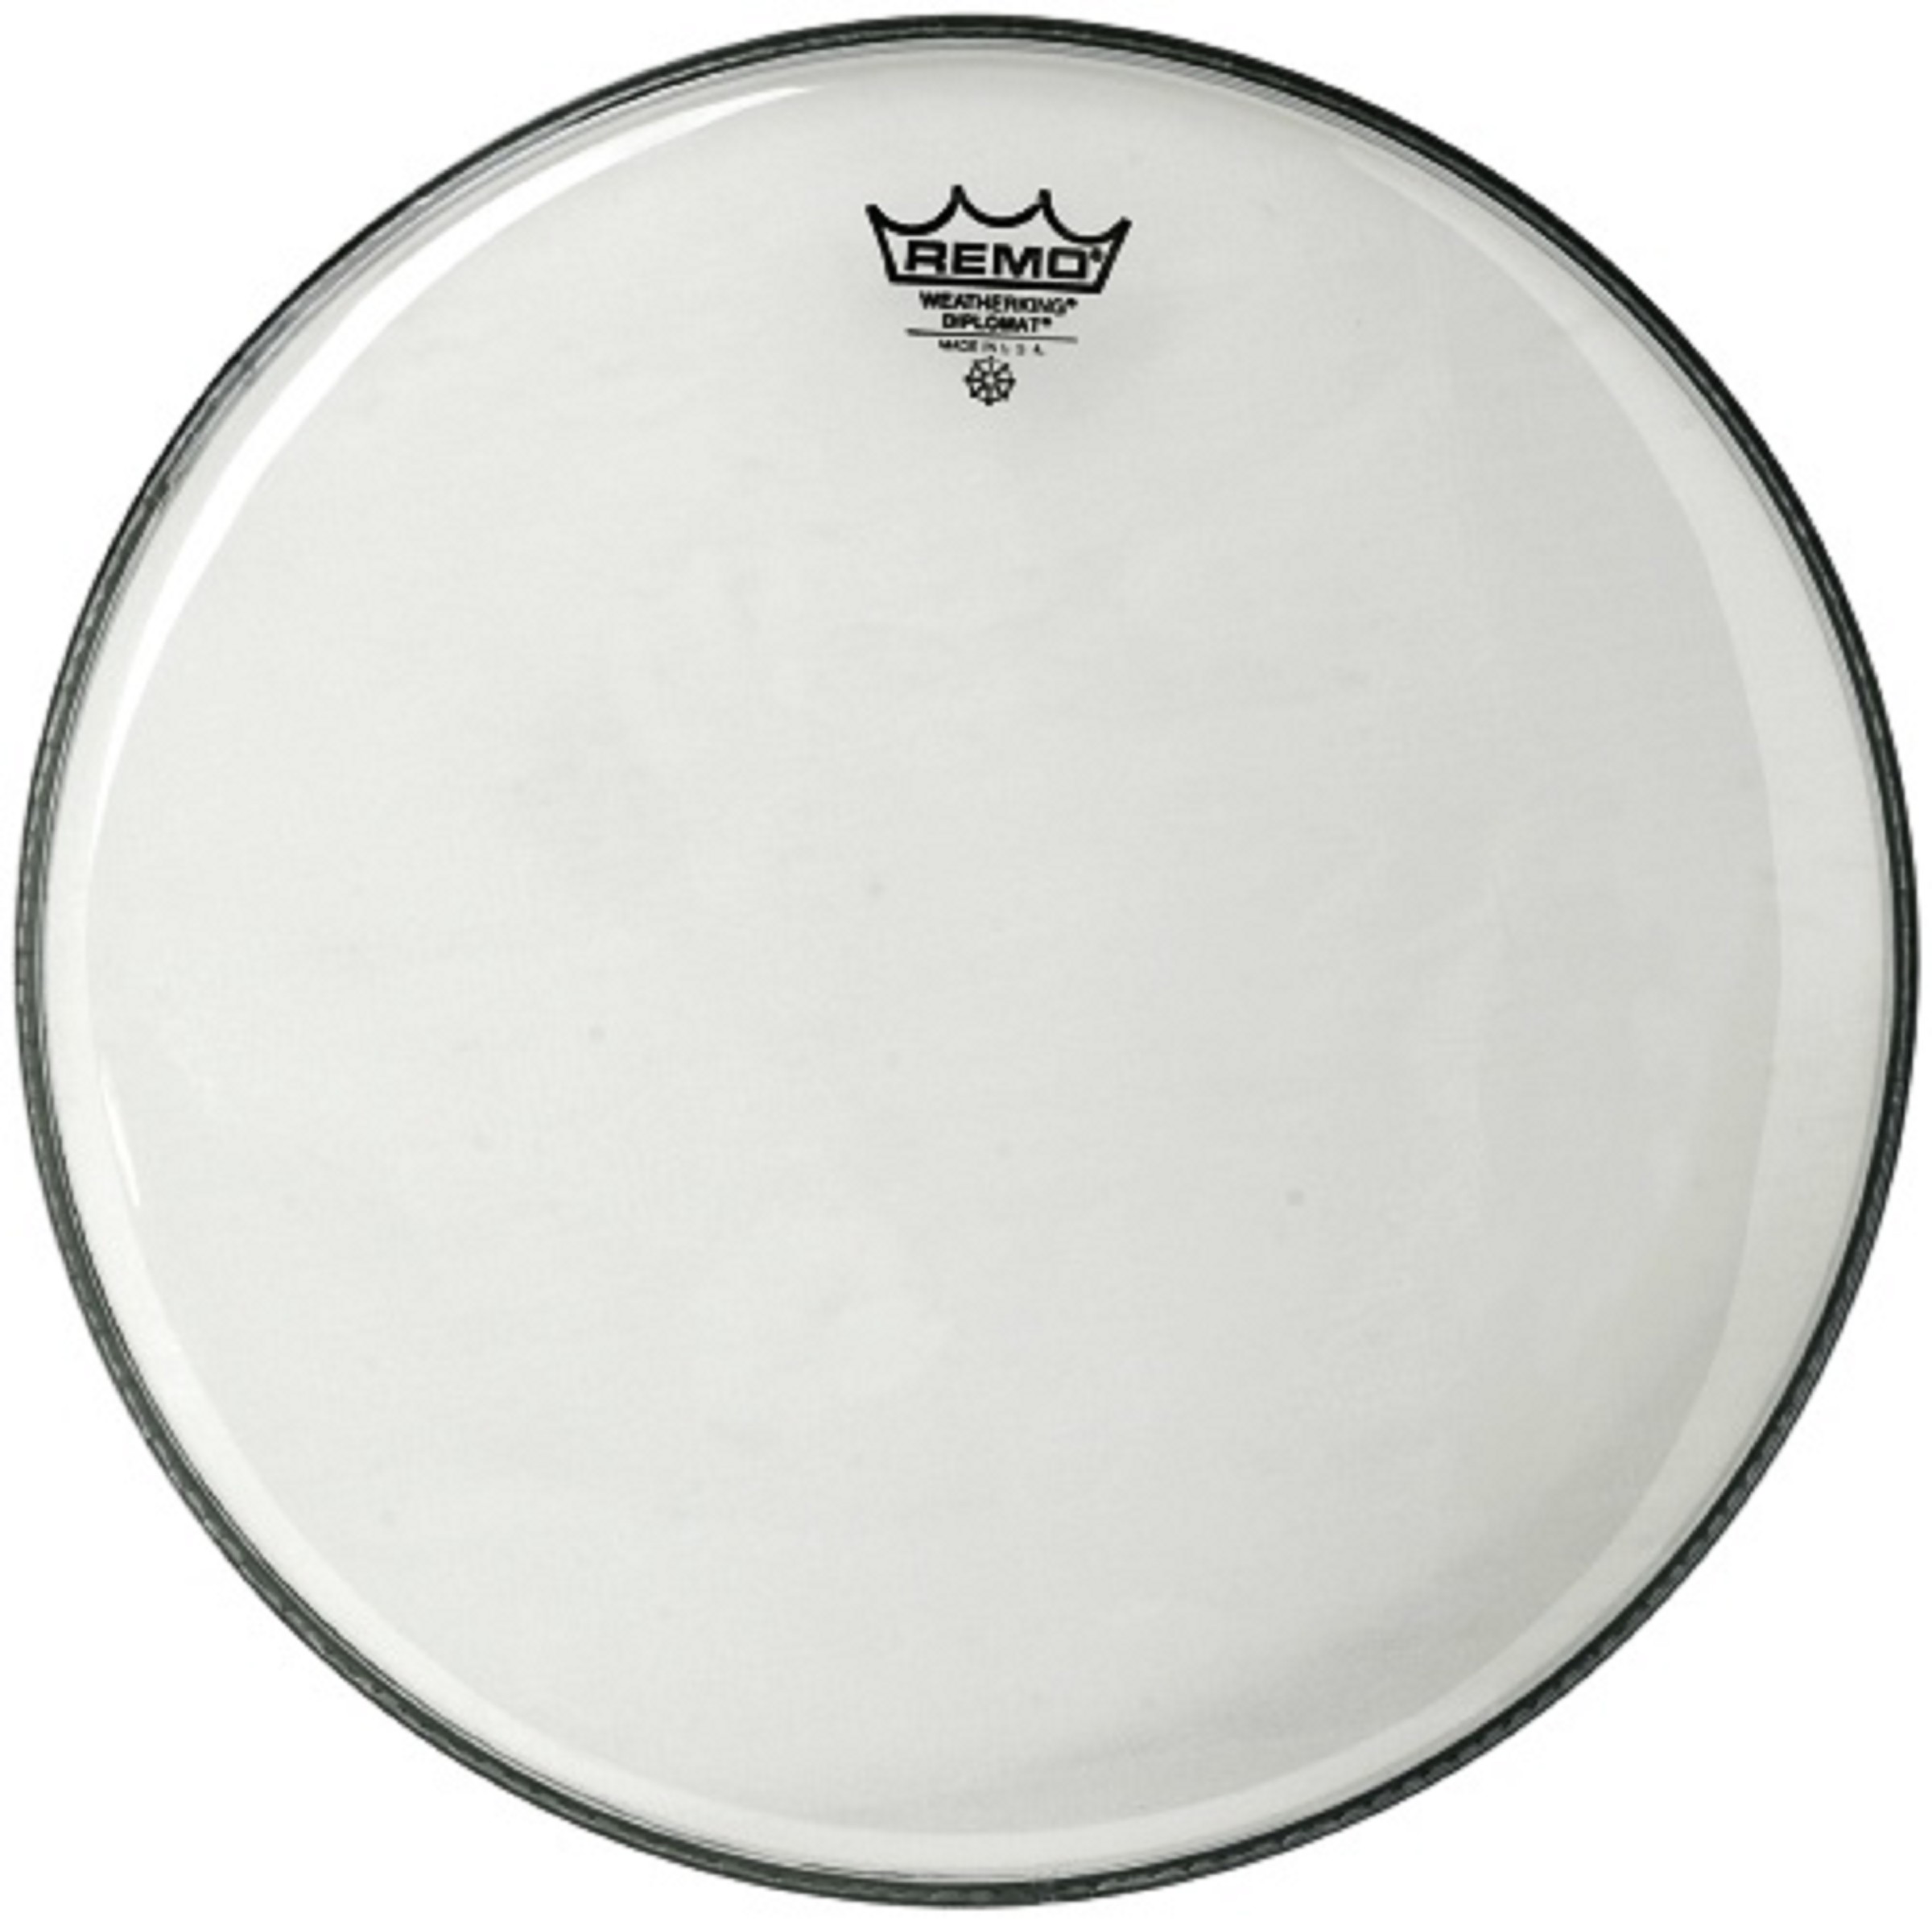 Remo Fell Diplomat 16" Clear